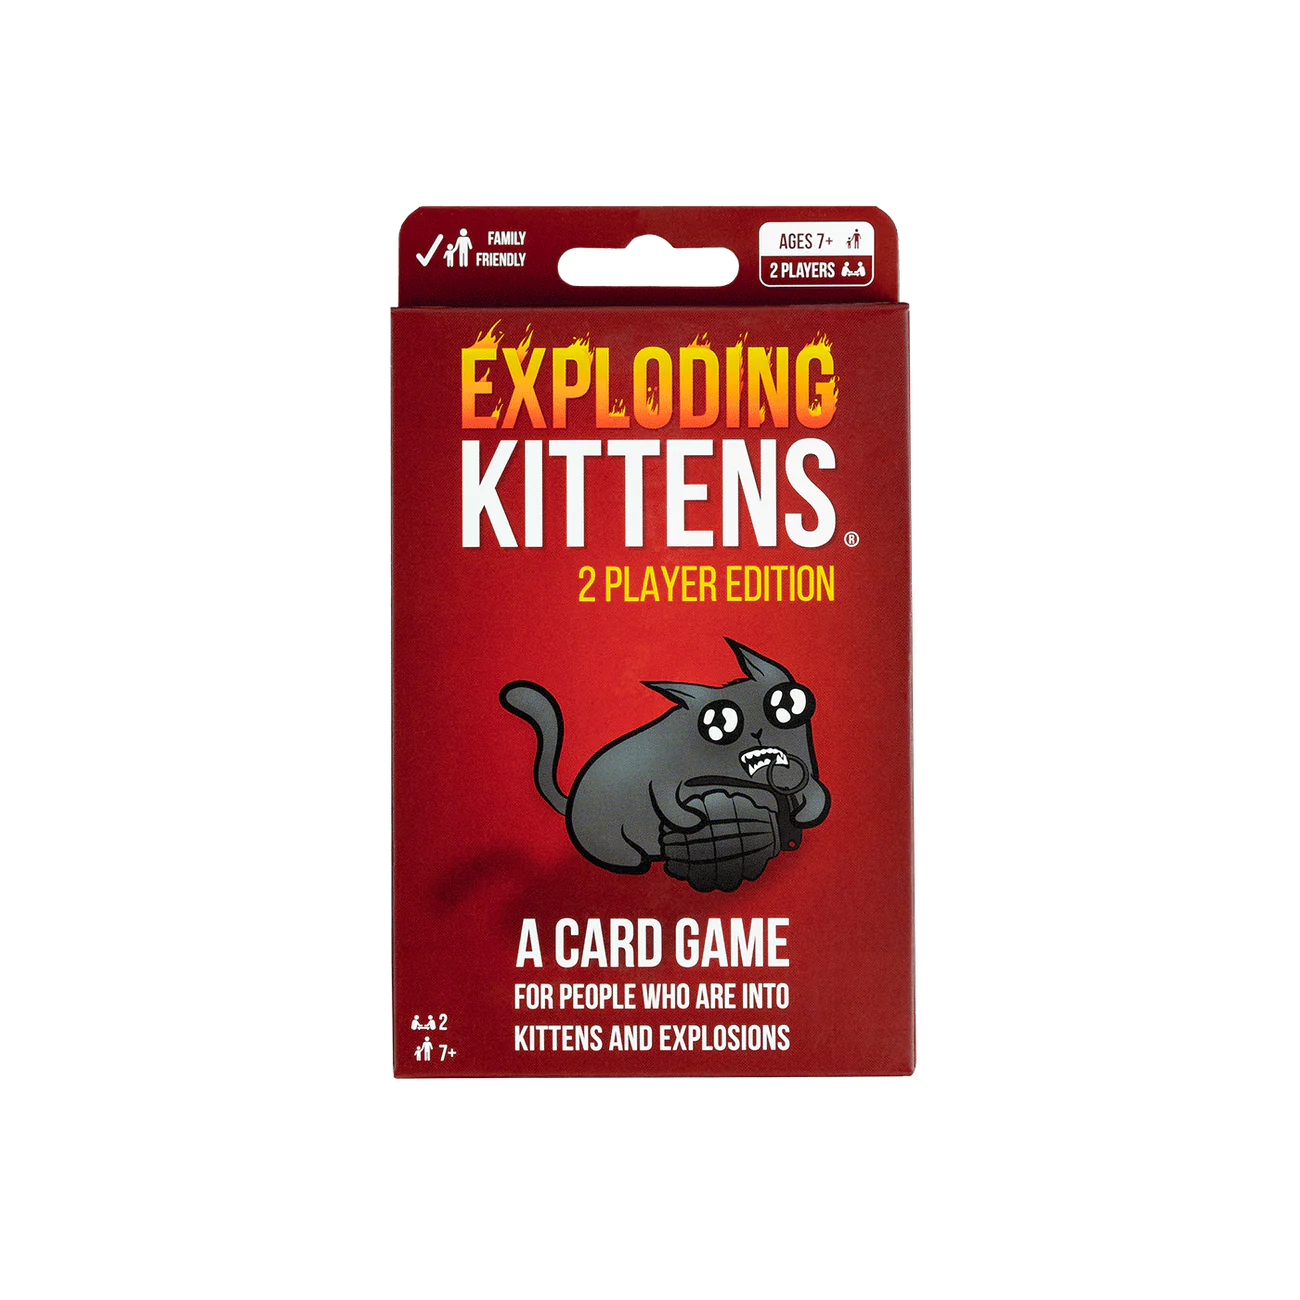 EXPLODING KITTENS 2-PLAYER EDITION